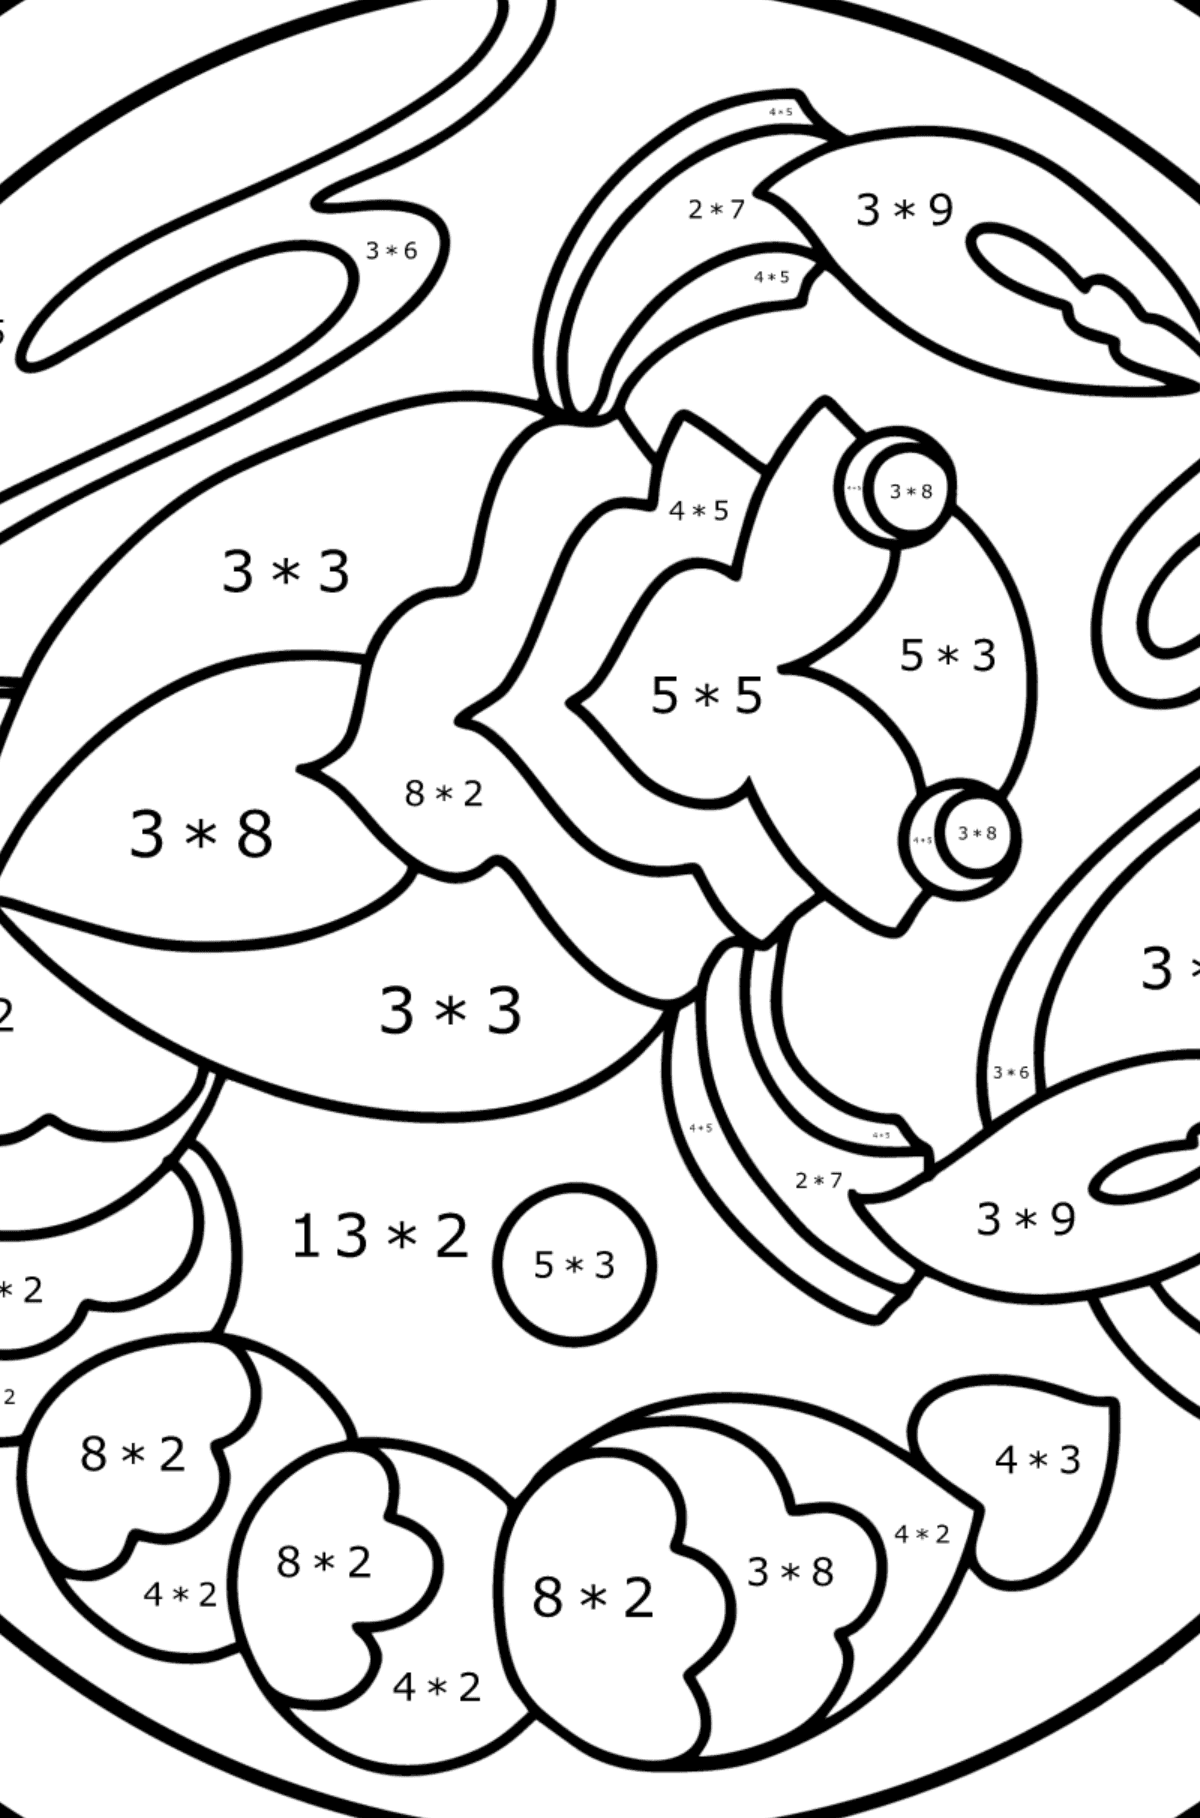 Coloring page for kids - zodiac sign Scorpio - Math Coloring - Multiplication for Kids